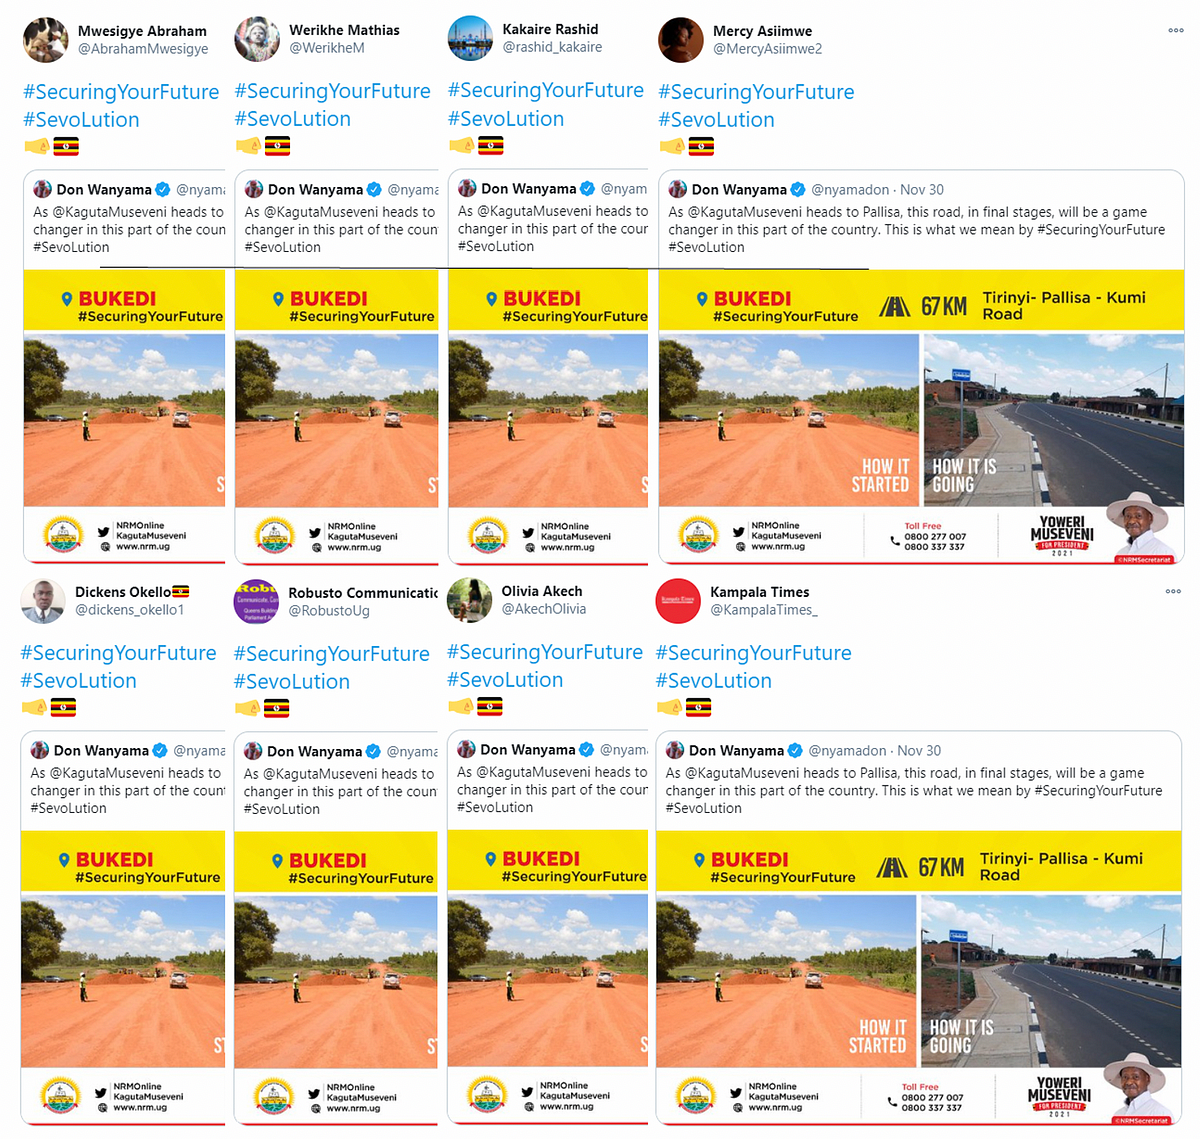 Eight accounts quoted a tweet by Don Wanyama within three minutes of one another. (Source: top row, left to right, @AbrahamMwesigye/archive; @WerikheM/archive; @rashid_kakaire/archive; @MercyAsiimwe2/archive; bottom row, left to right, @dickens_okello1/archive; @RobustoUg/archive; @AkechOlivia/archive; @KampalaTimes_/archive)